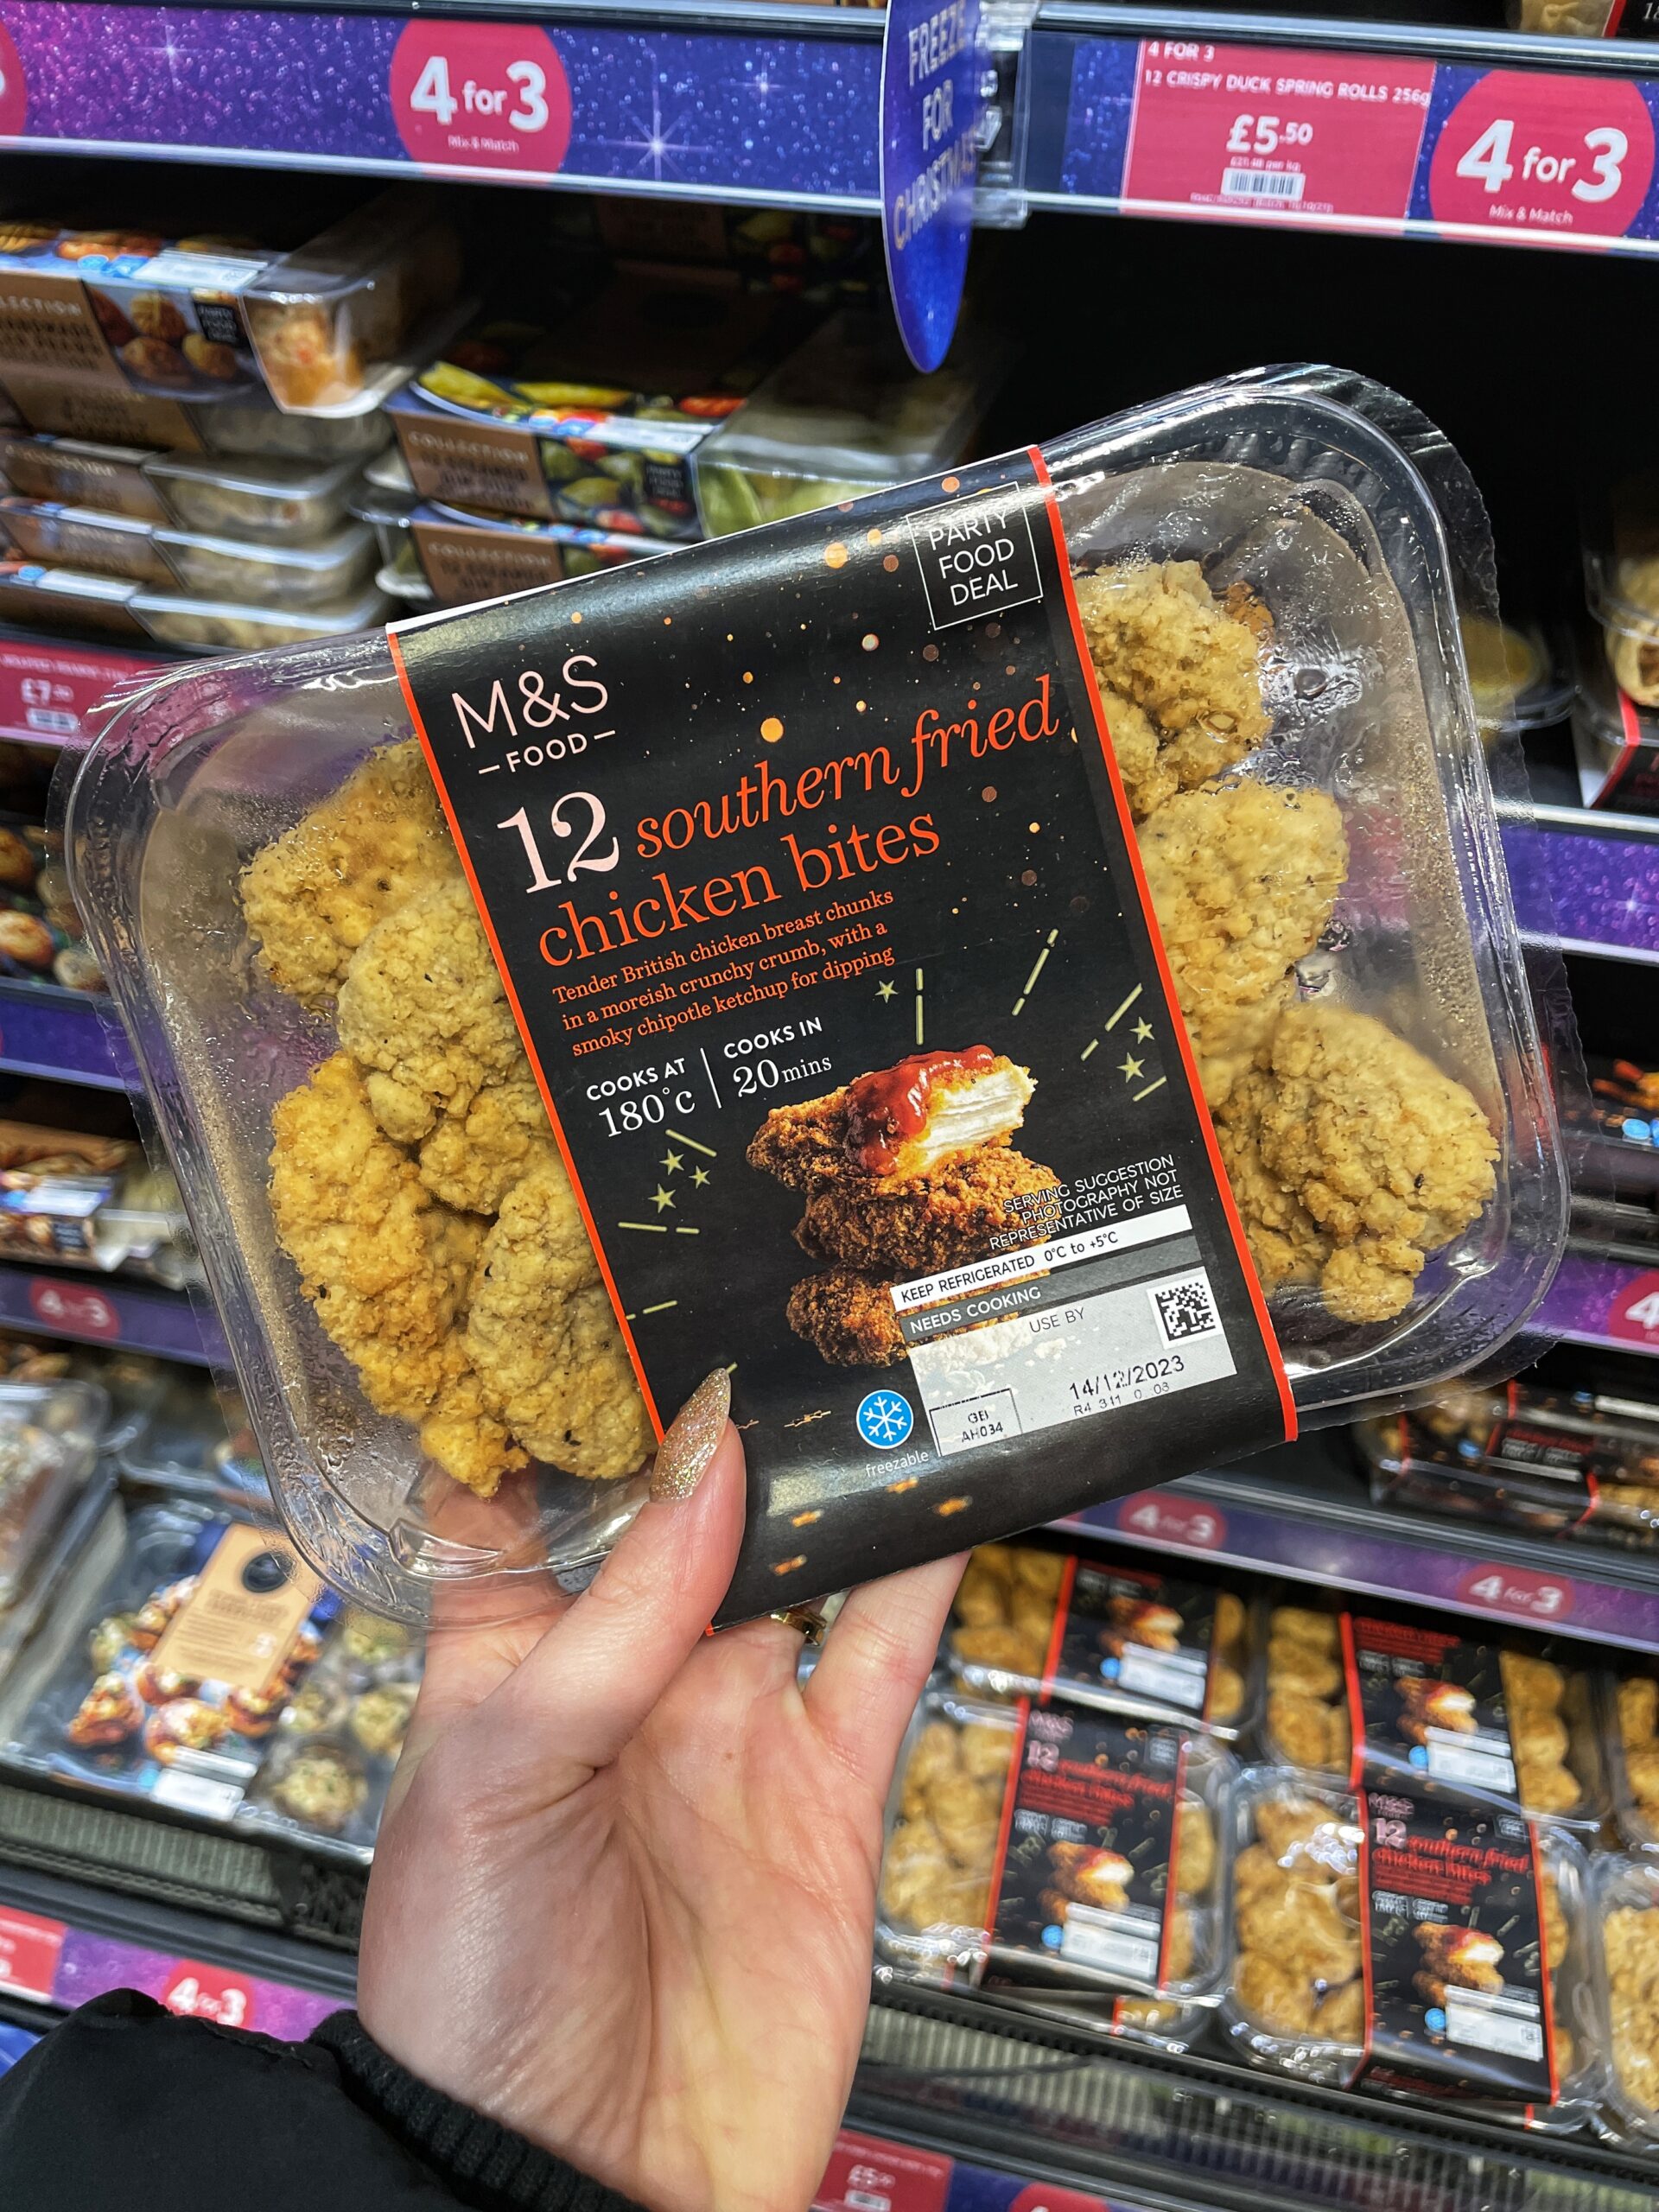 M&S also has southern fried chicken for Christmas, obviously